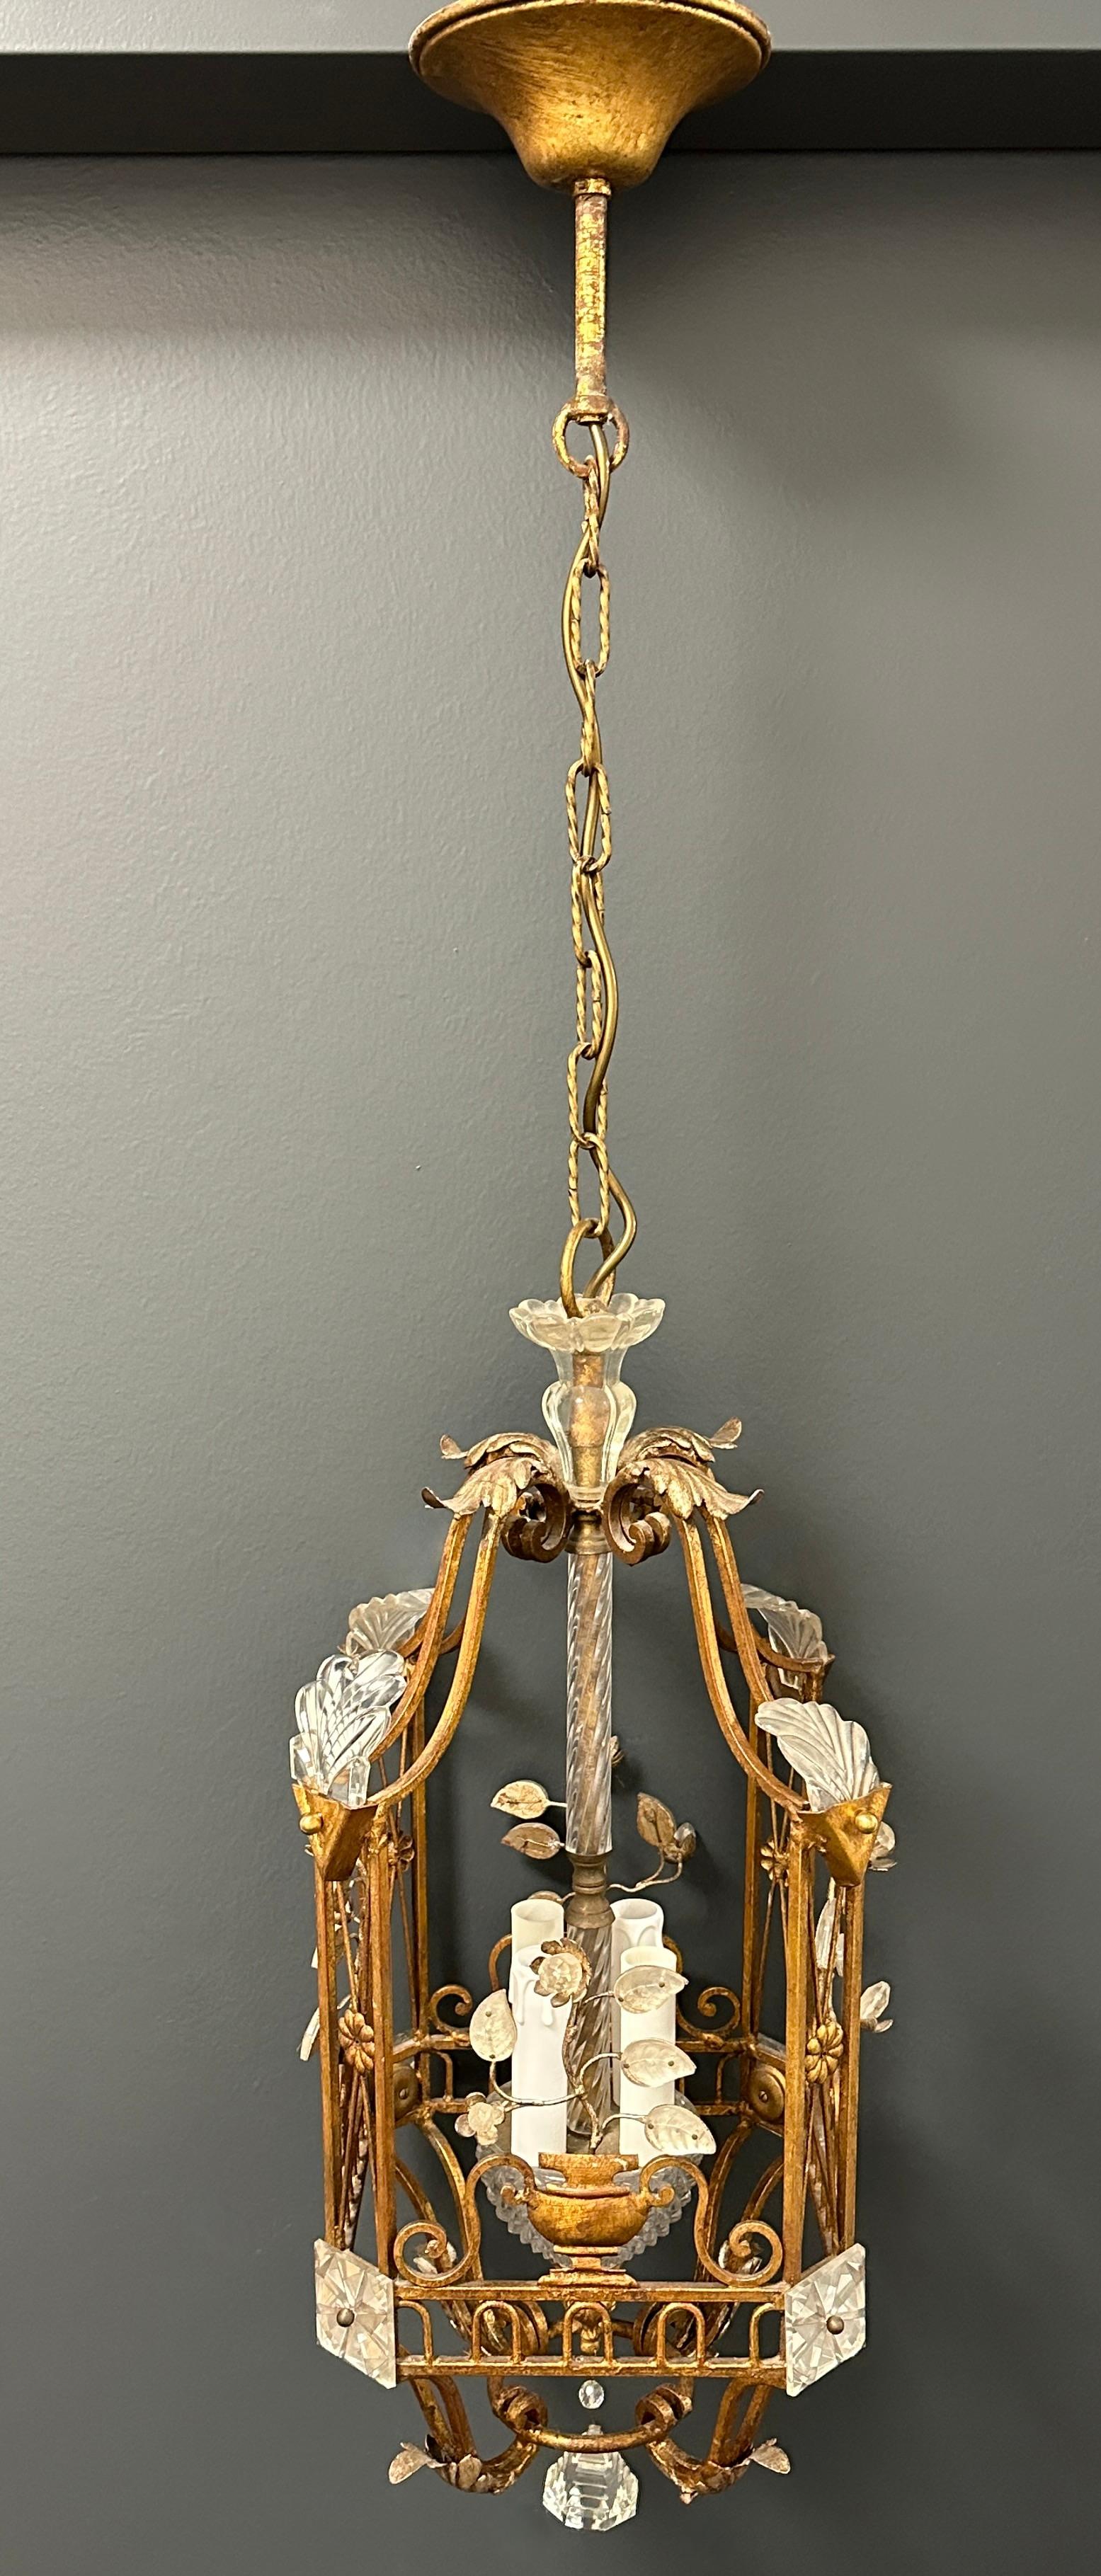 A beautiful Gilt iron and crystal lantern chandelier by the prestigious Maison Baguès.
Square four light handmade gilt bronze with crystal leaves and flora, beautiful piece of art.
Measurement: 12